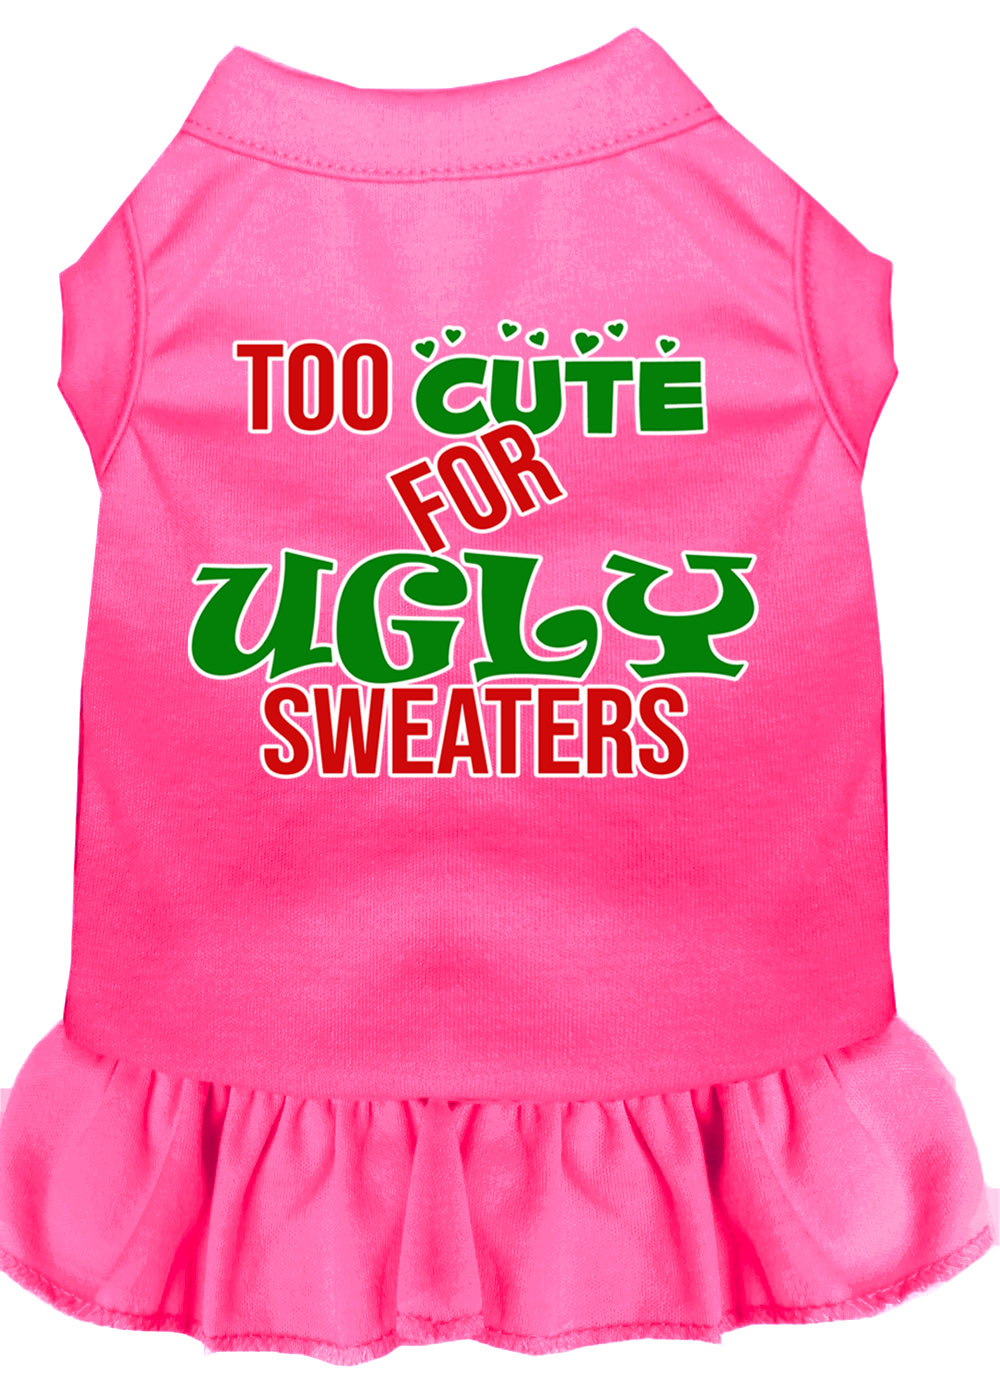 Too Cute for Ugly Sweaters Screen Print Dog Dress Bright Pink Med